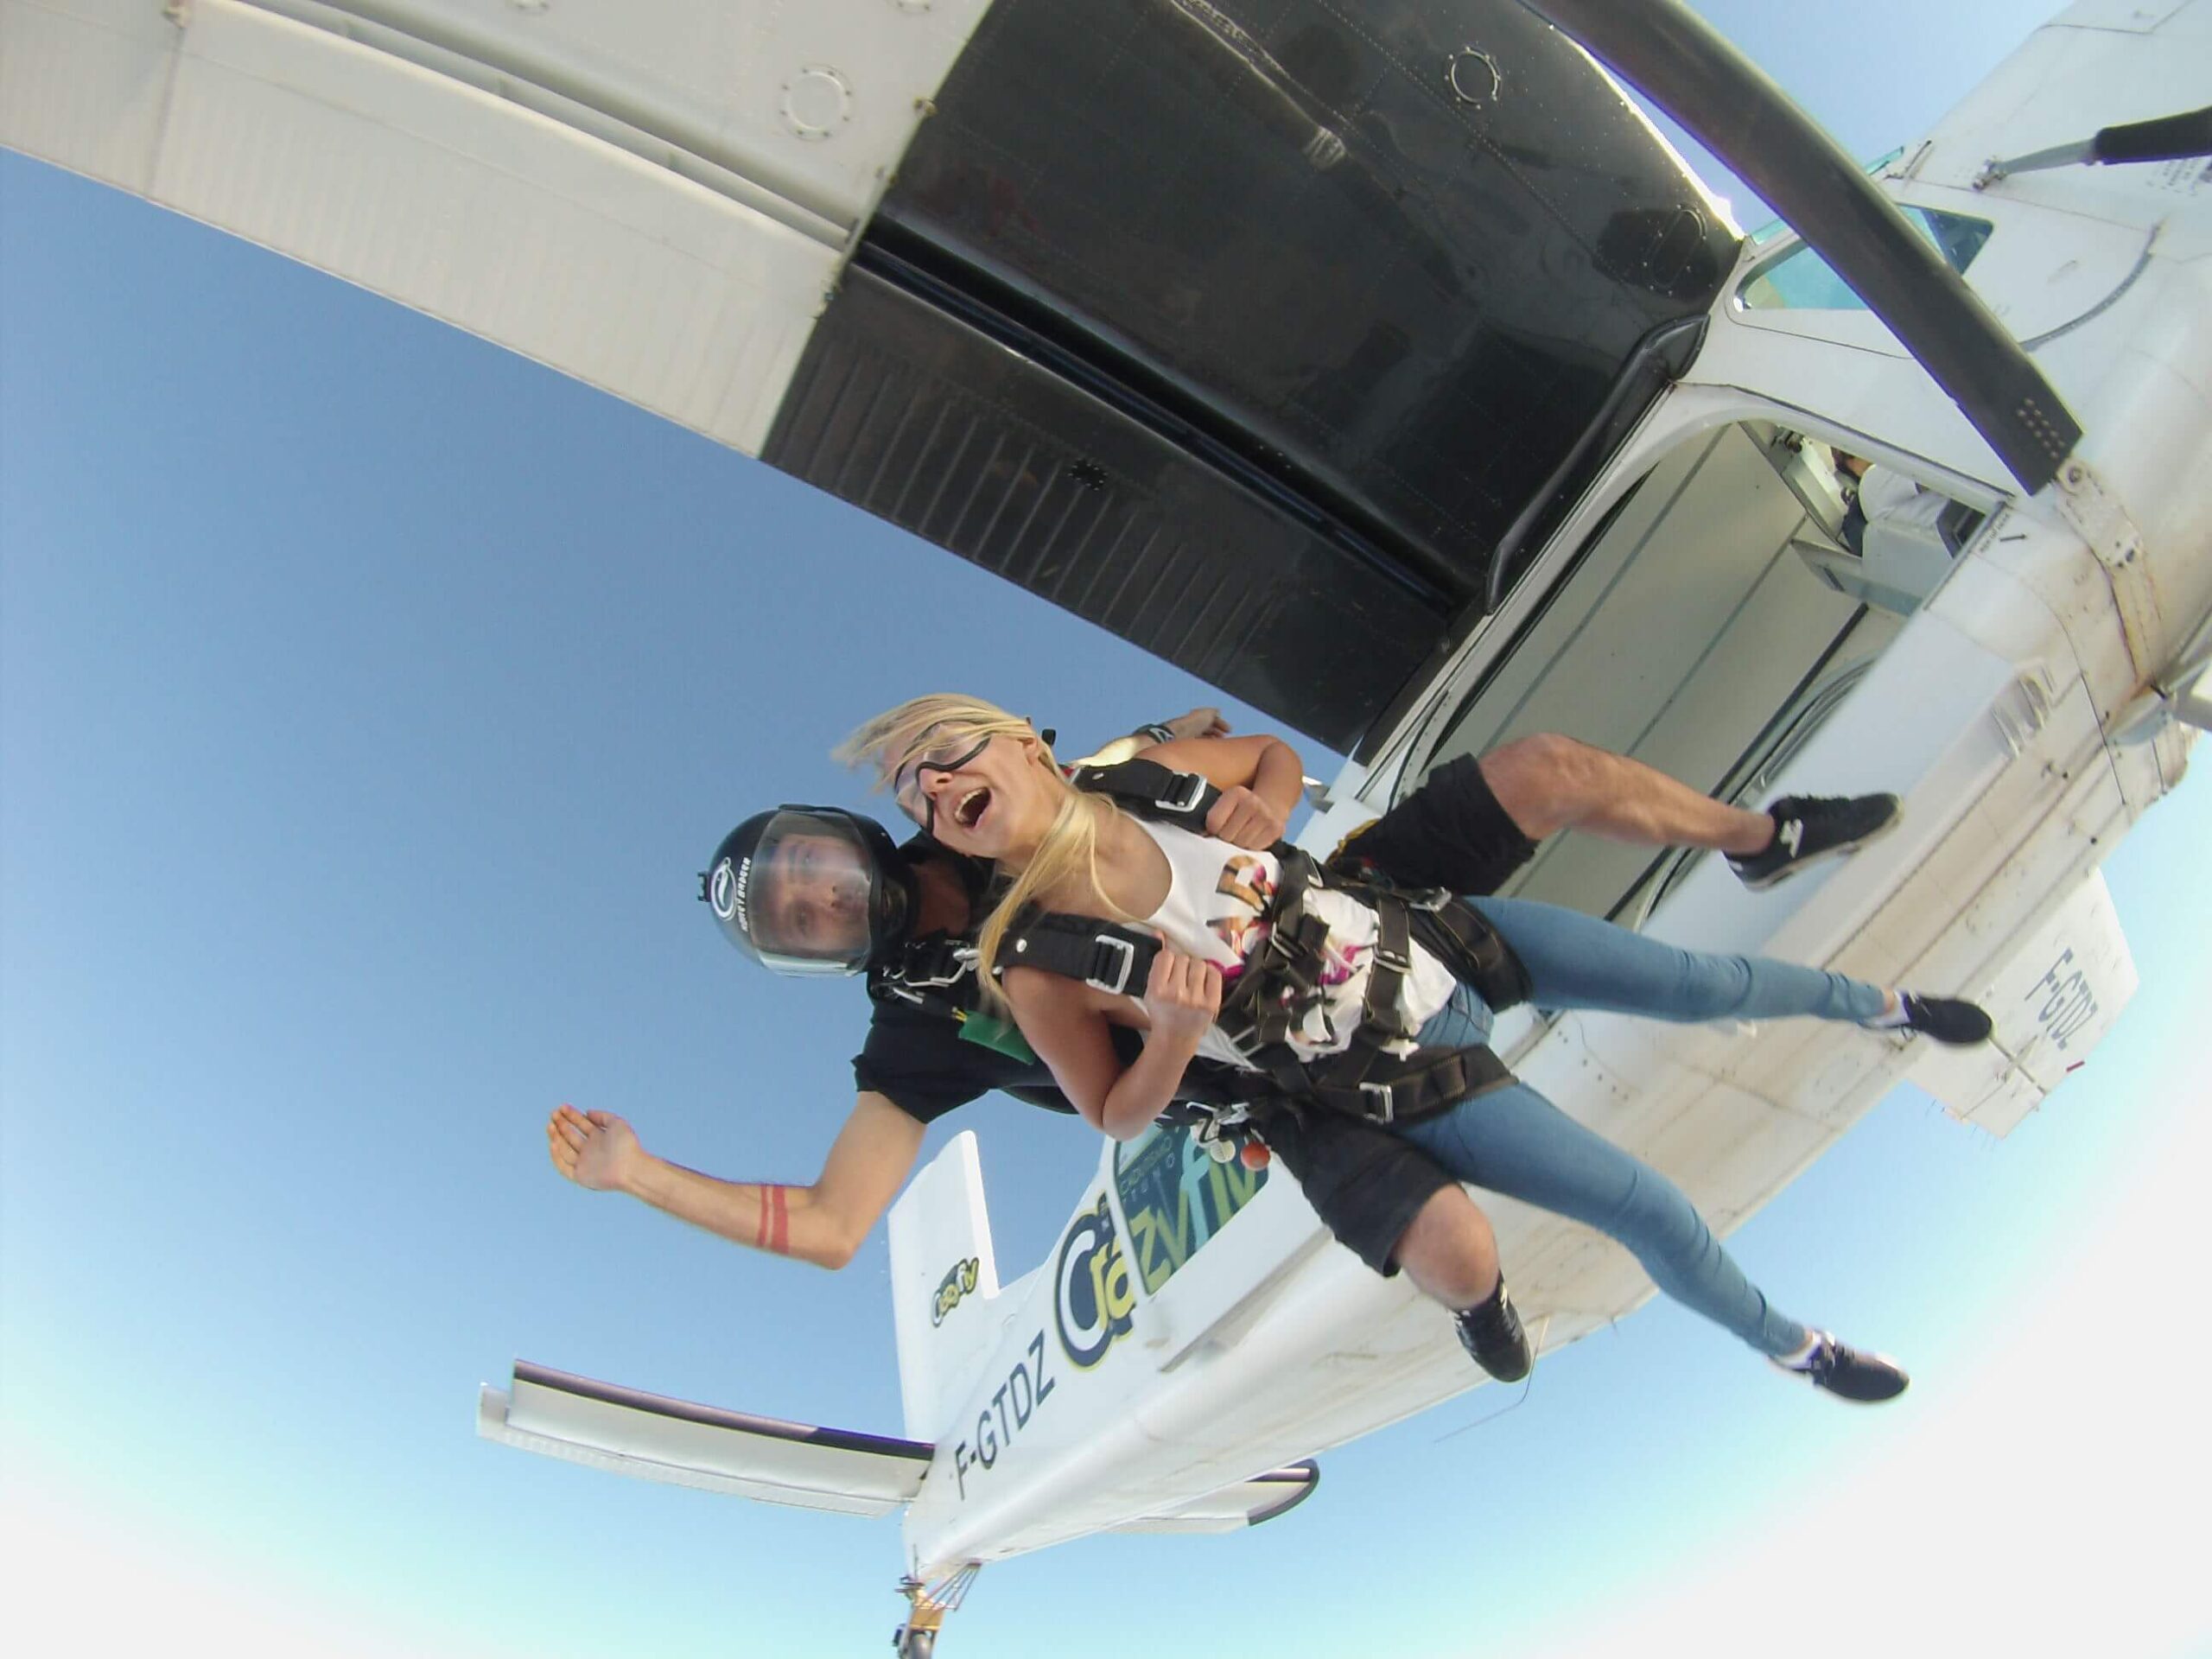 Rome Skydiving |Tandem Jumping in Rome| Parachute Jump in Rome Exclusive Experience 